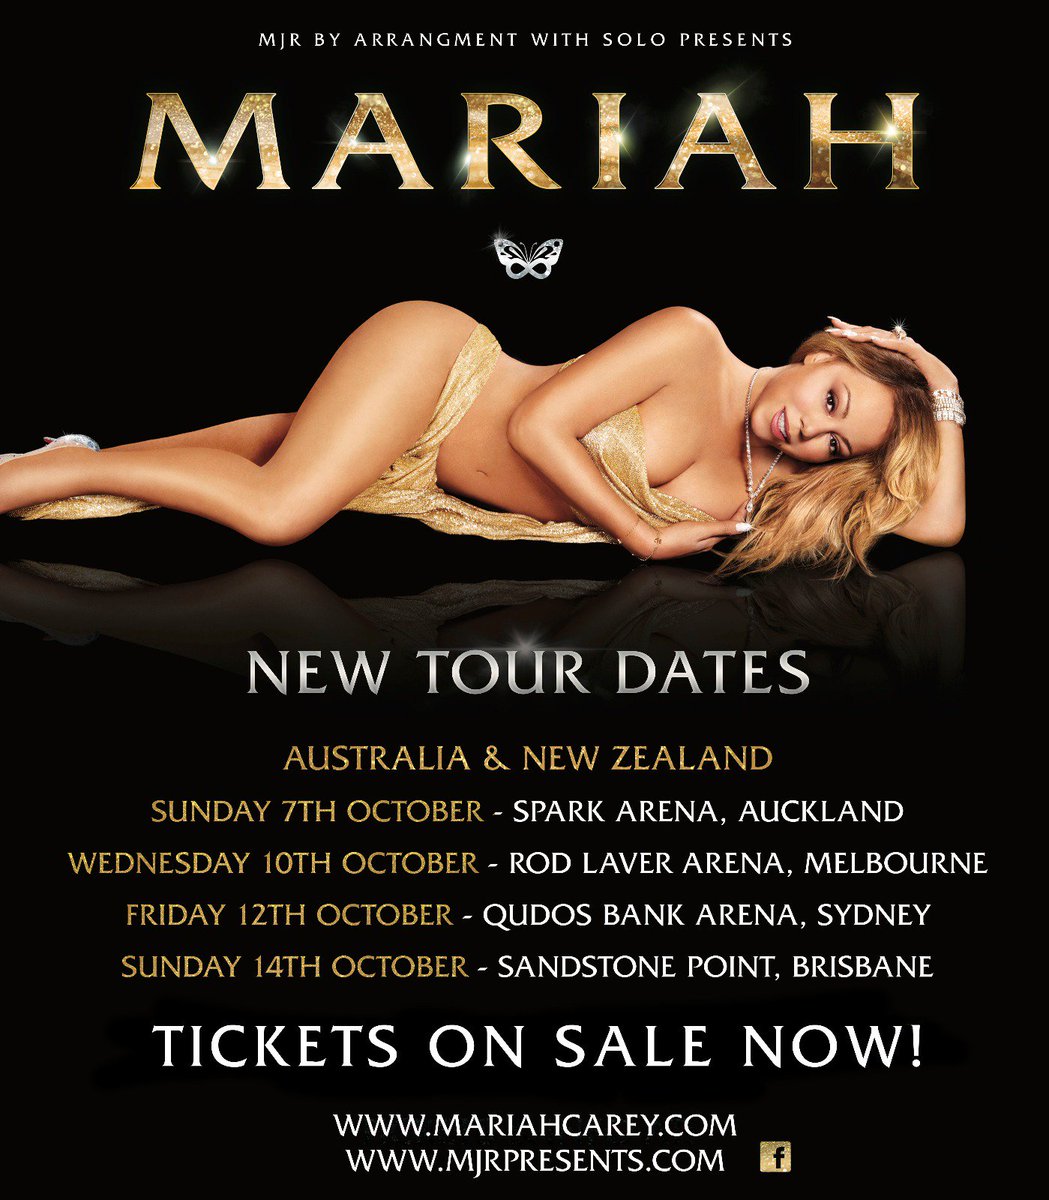 Australia & New Zealand! Tickets for my shows in October are on sale now! ???????? https://t.co/iCGLcnrLHj https://t.co/bX1fCFUpGW